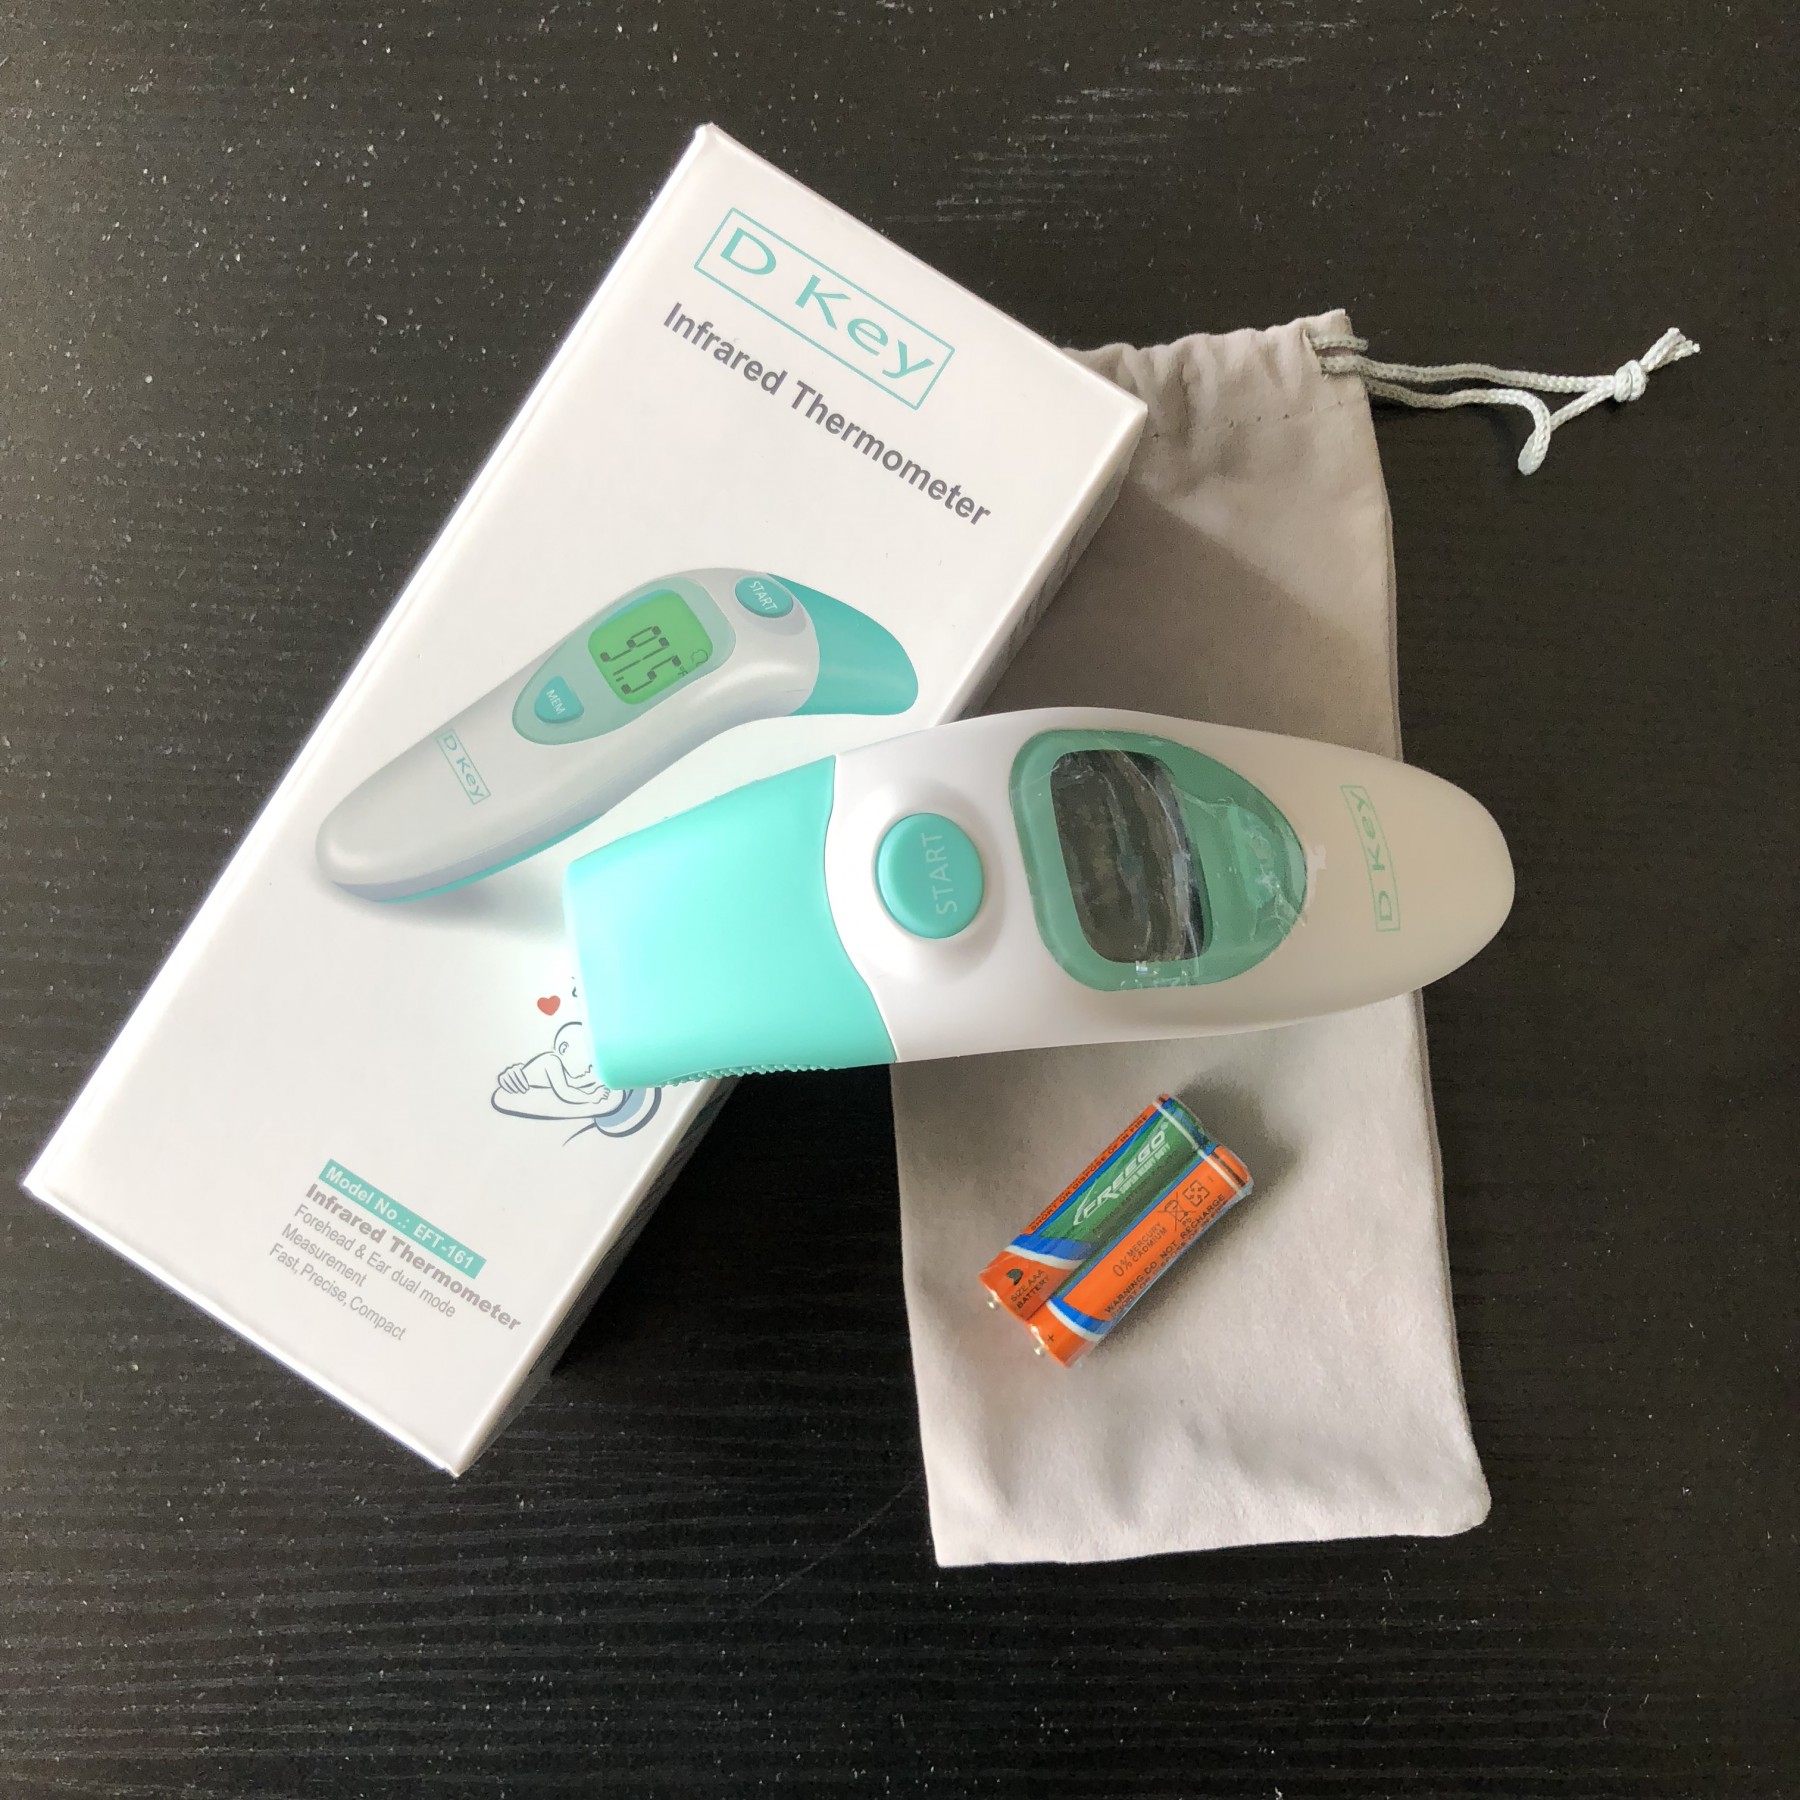 D D KEY infrared baby thermometer review